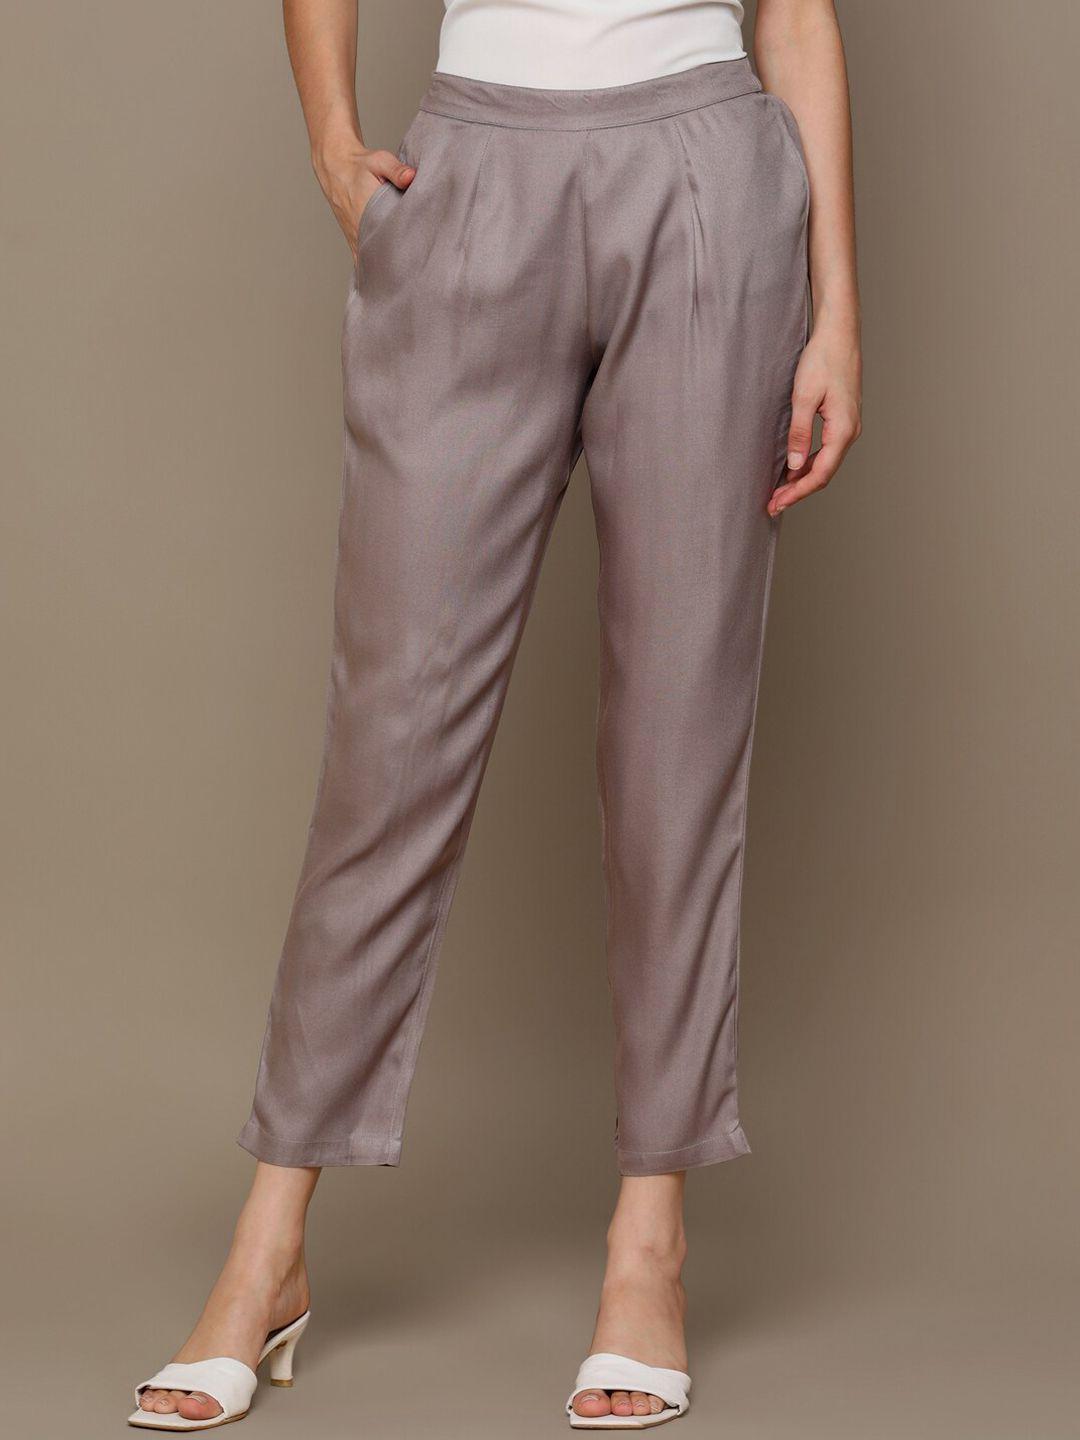 here&now women grey mid-rise cropped cigarette trousers